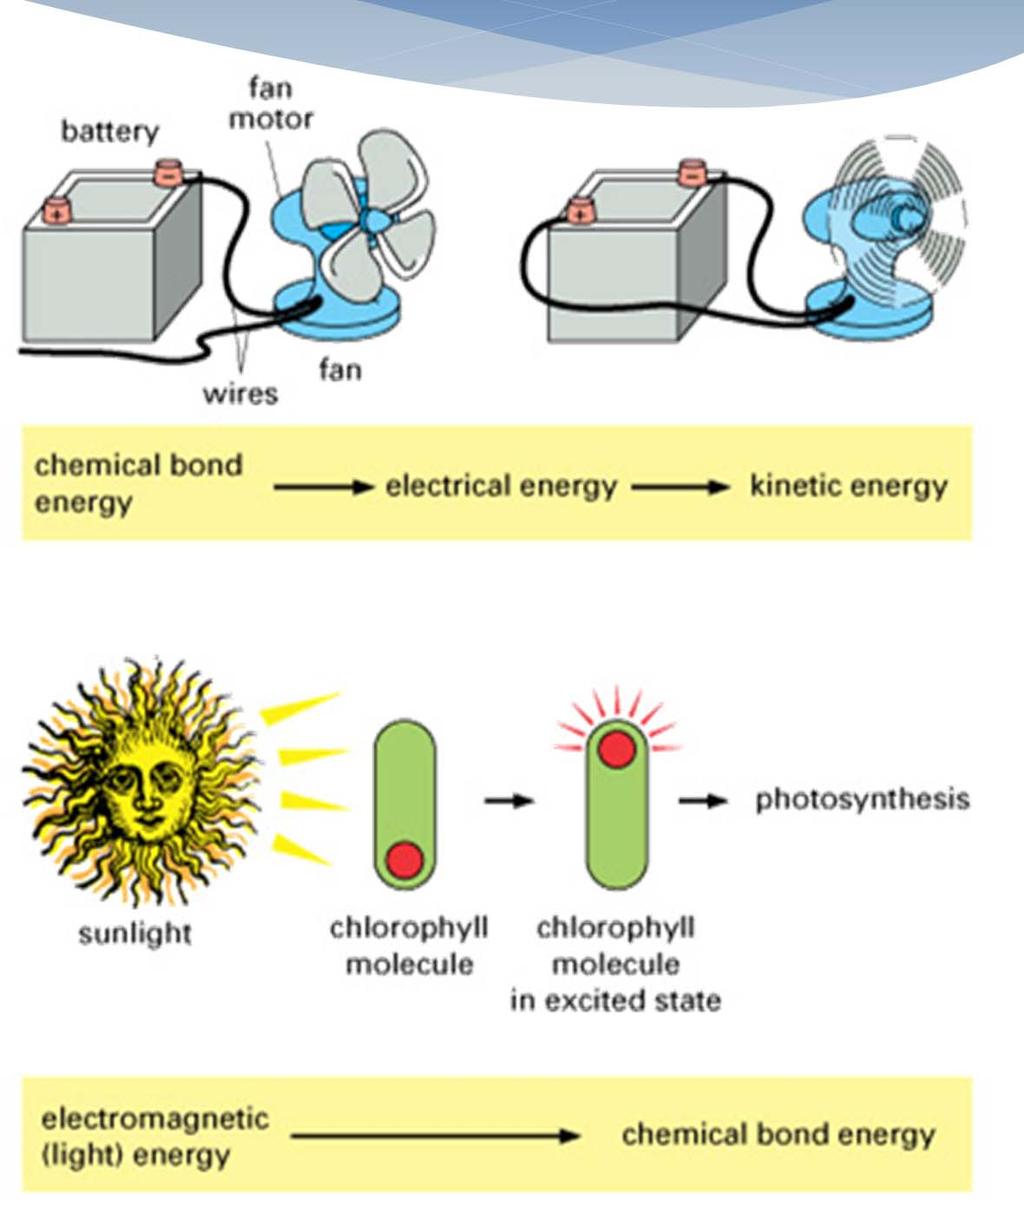 2b Energy can be transformed from one type to another Batteries contain energy in the form of chemical potential energy.